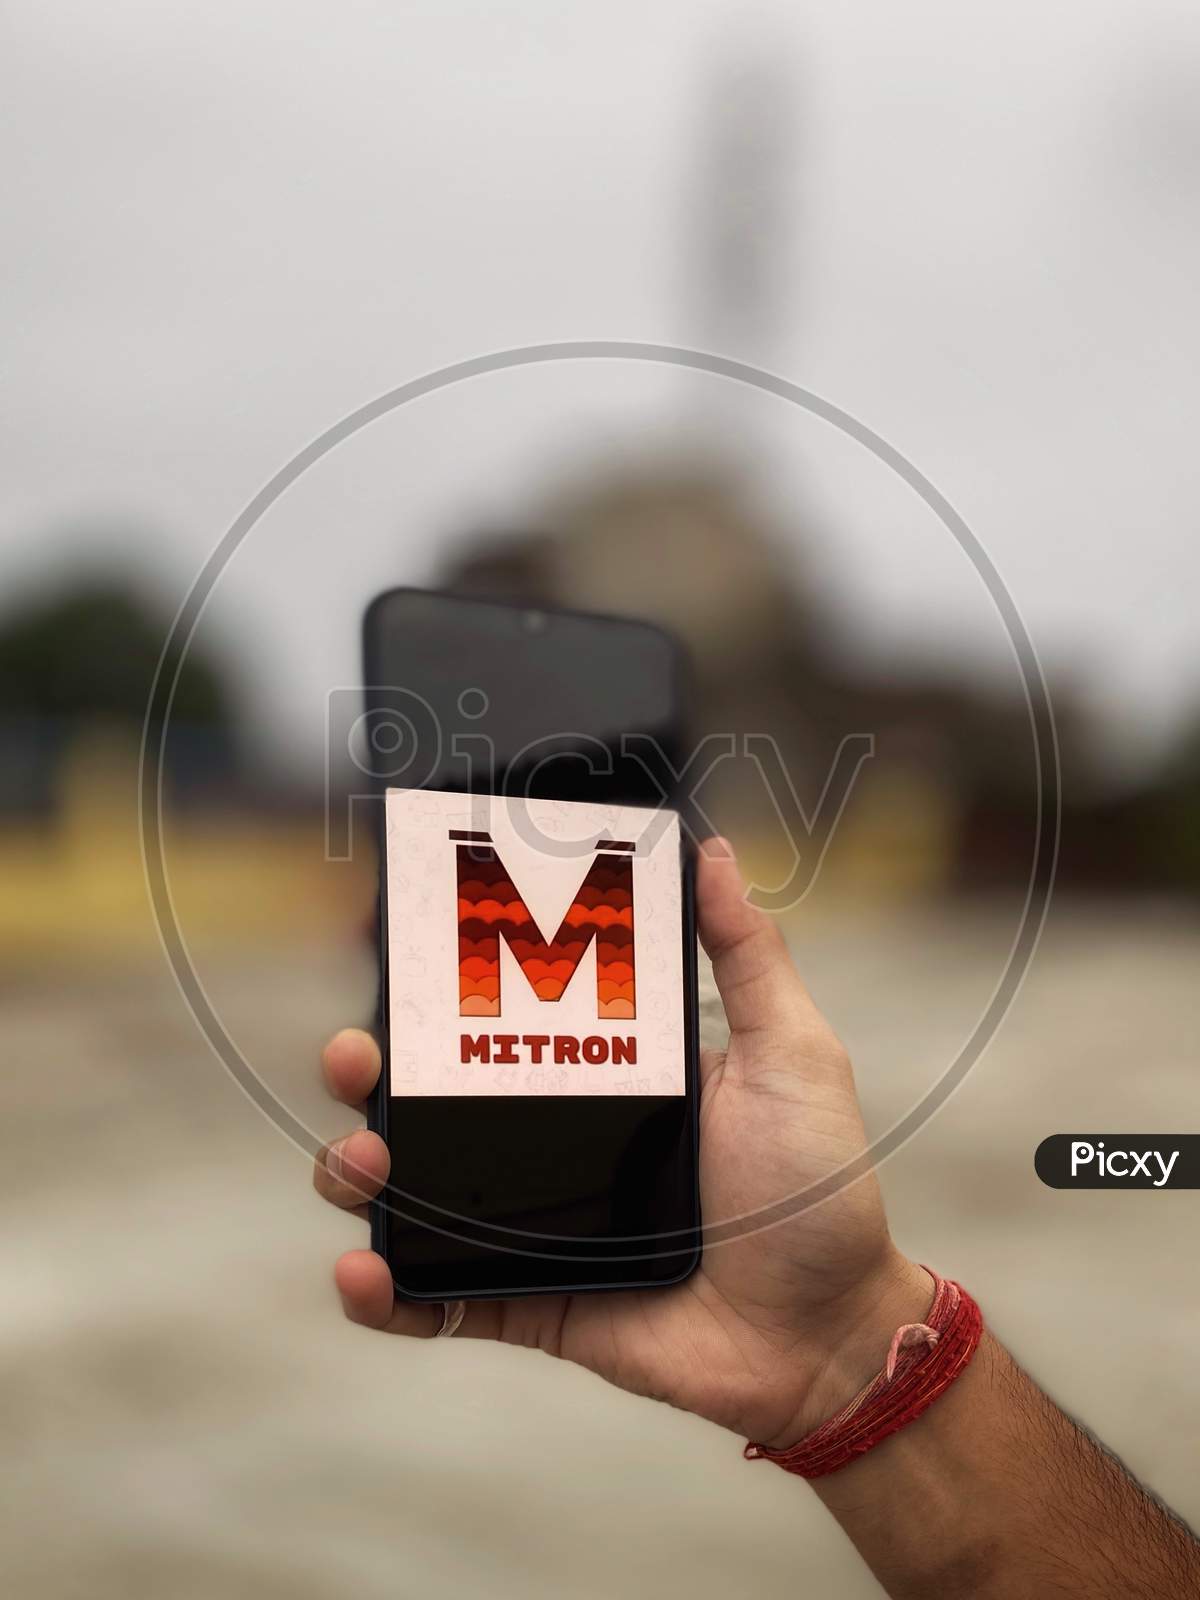 Illustration of Made in India short video Application, Mitron